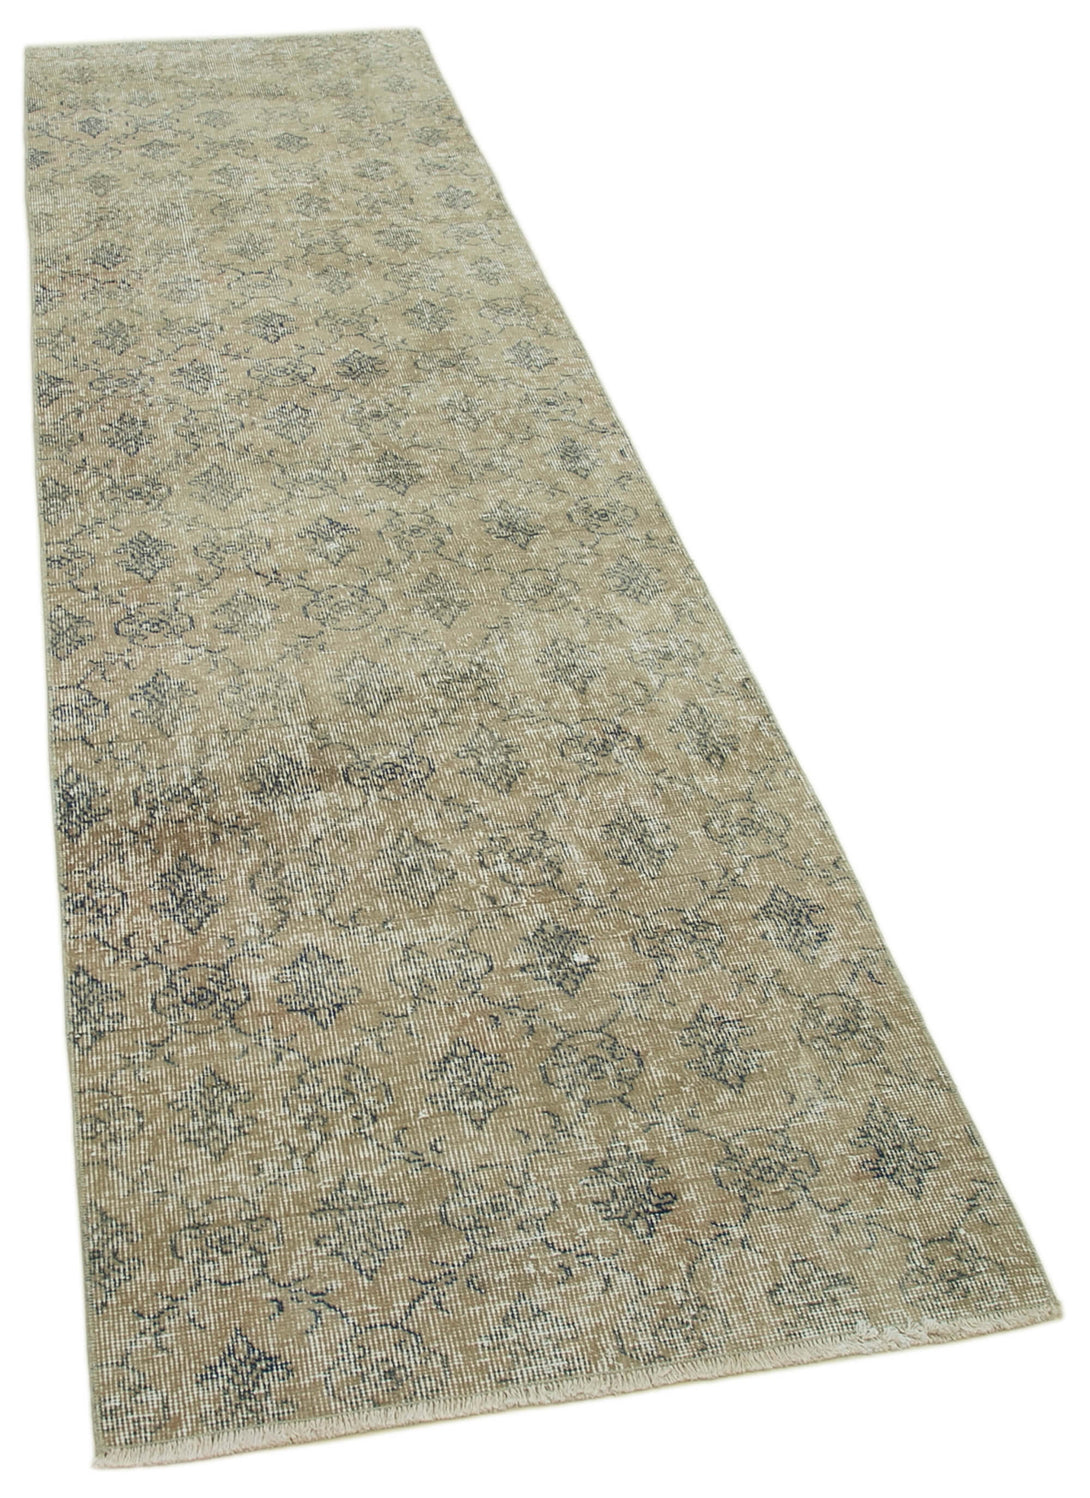 Handmade Overdyed Runner > Design# OL-AC-37178 > Size: 2'-8" x 9'-7", Carpet Culture Rugs, Handmade Rugs, NYC Rugs, New Rugs, Shop Rugs, Rug Store, Outlet Rugs, SoHo Rugs, Rugs in USA